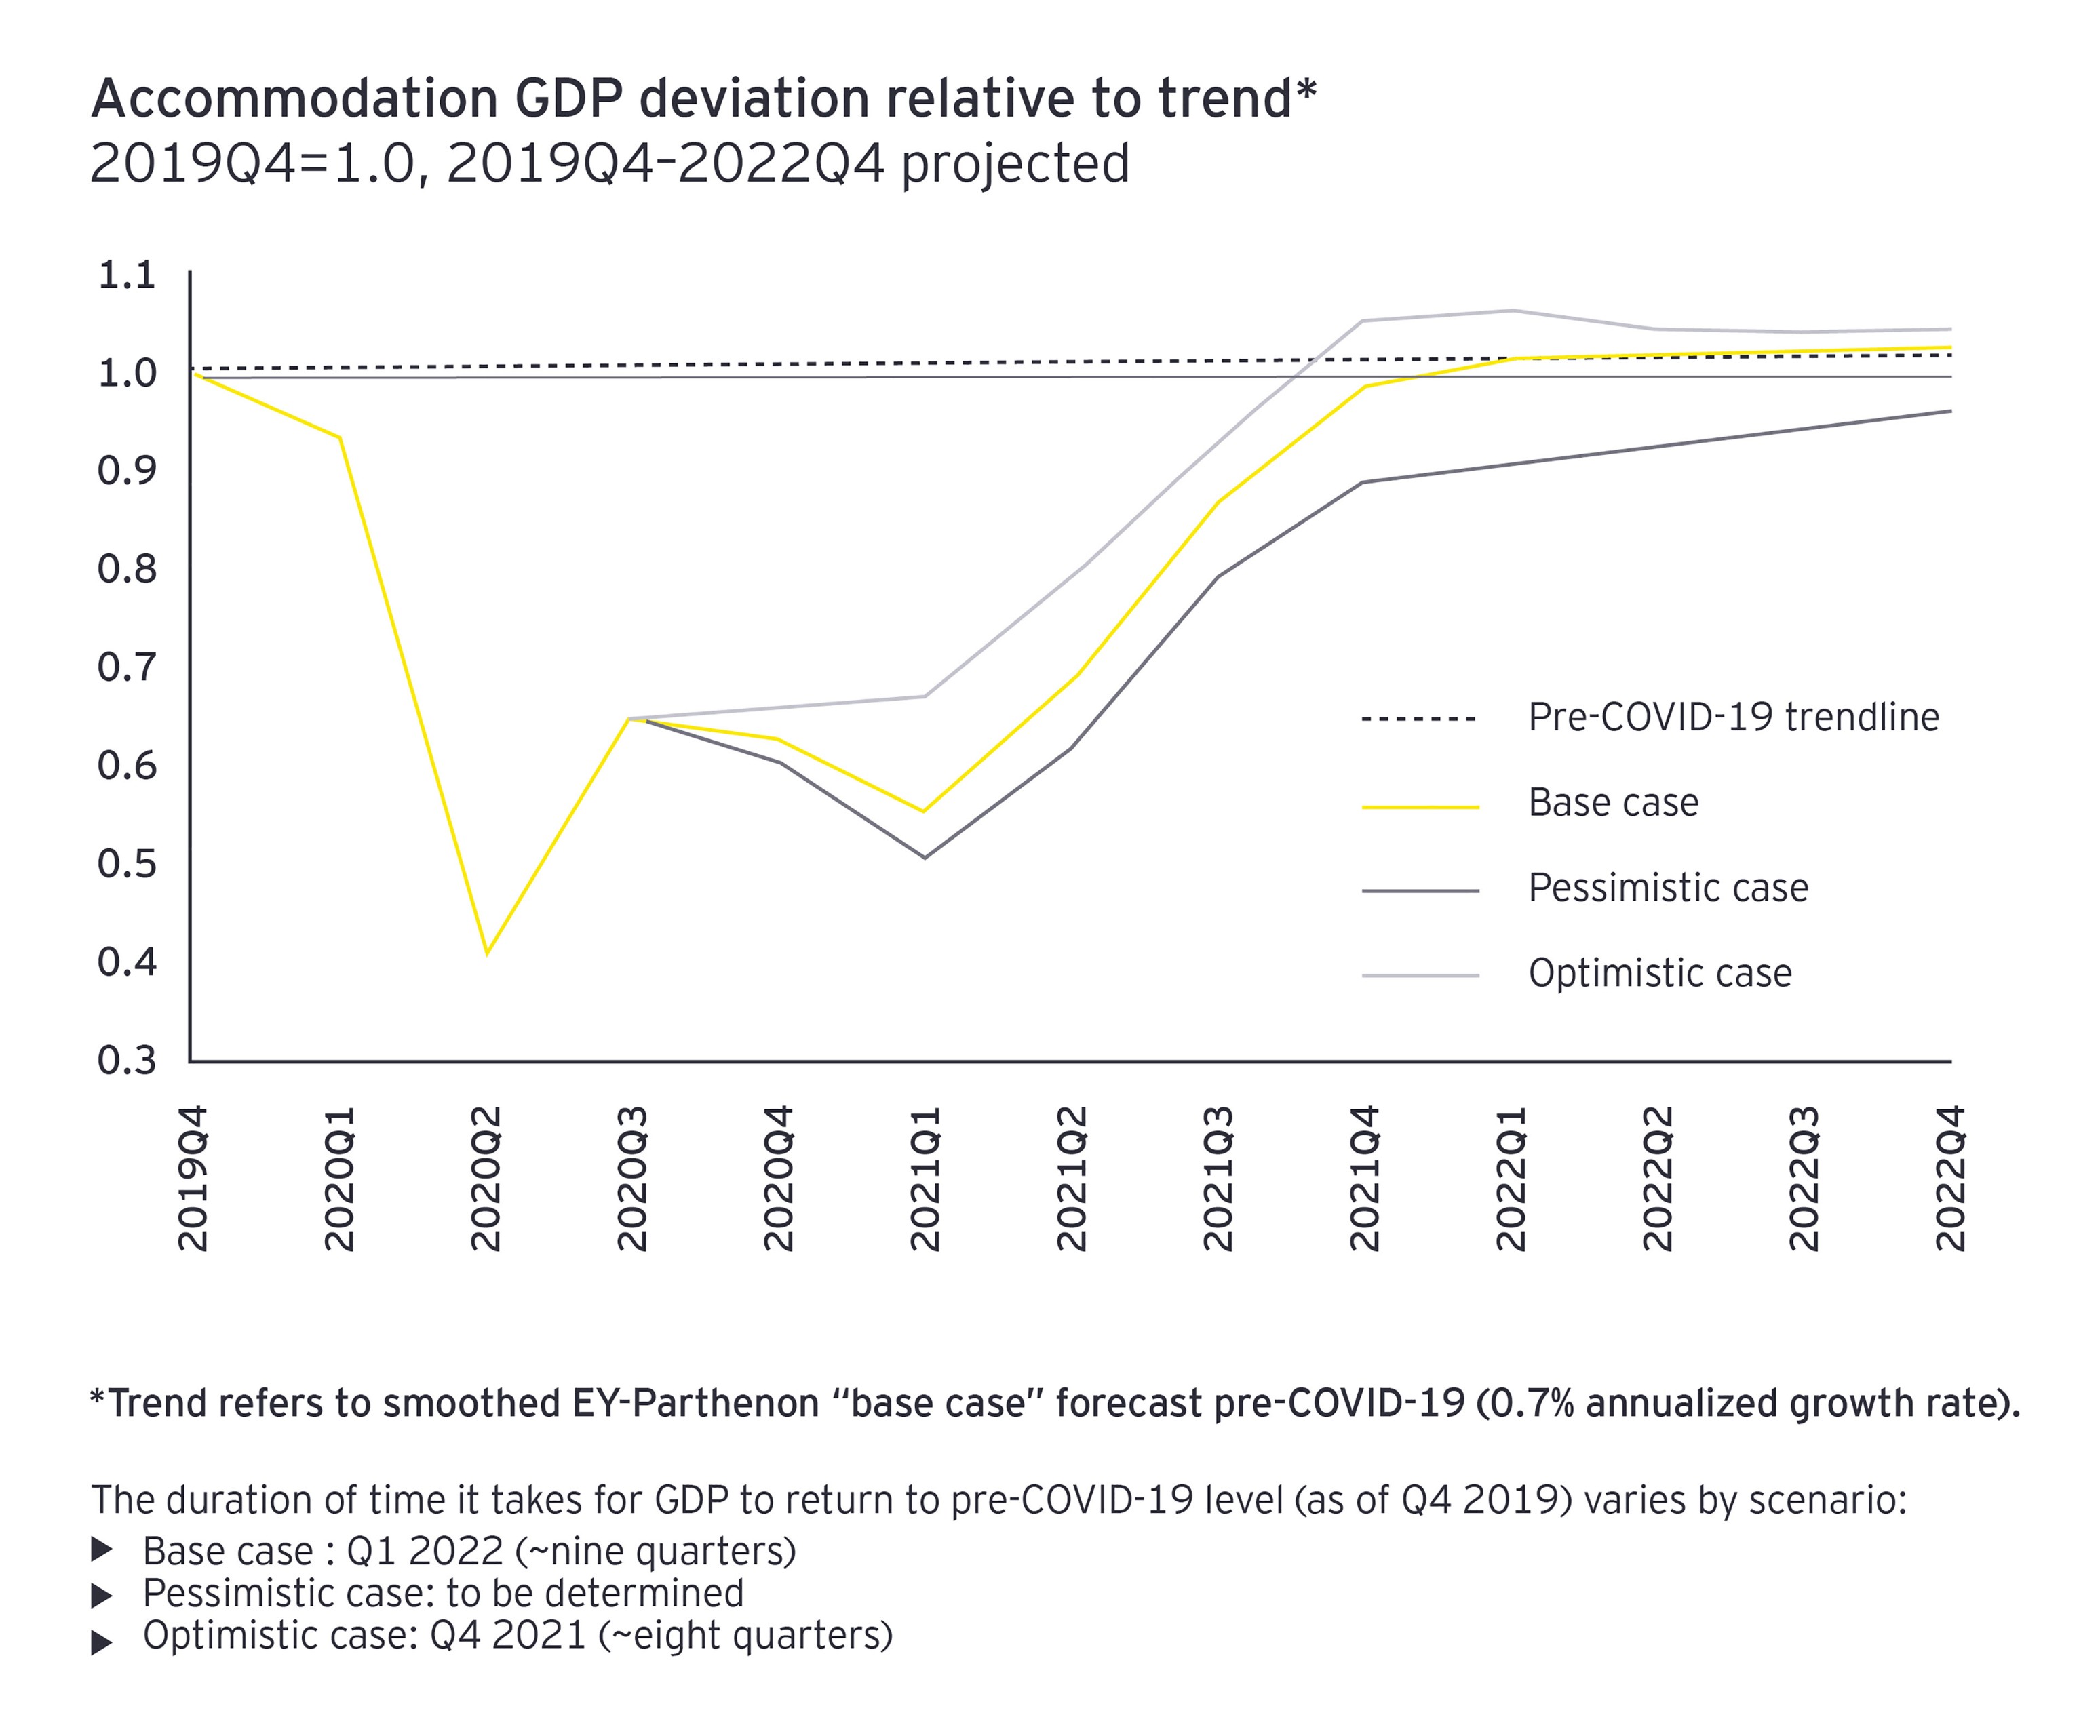 Proprietary economic forecasts for the hospitality sector